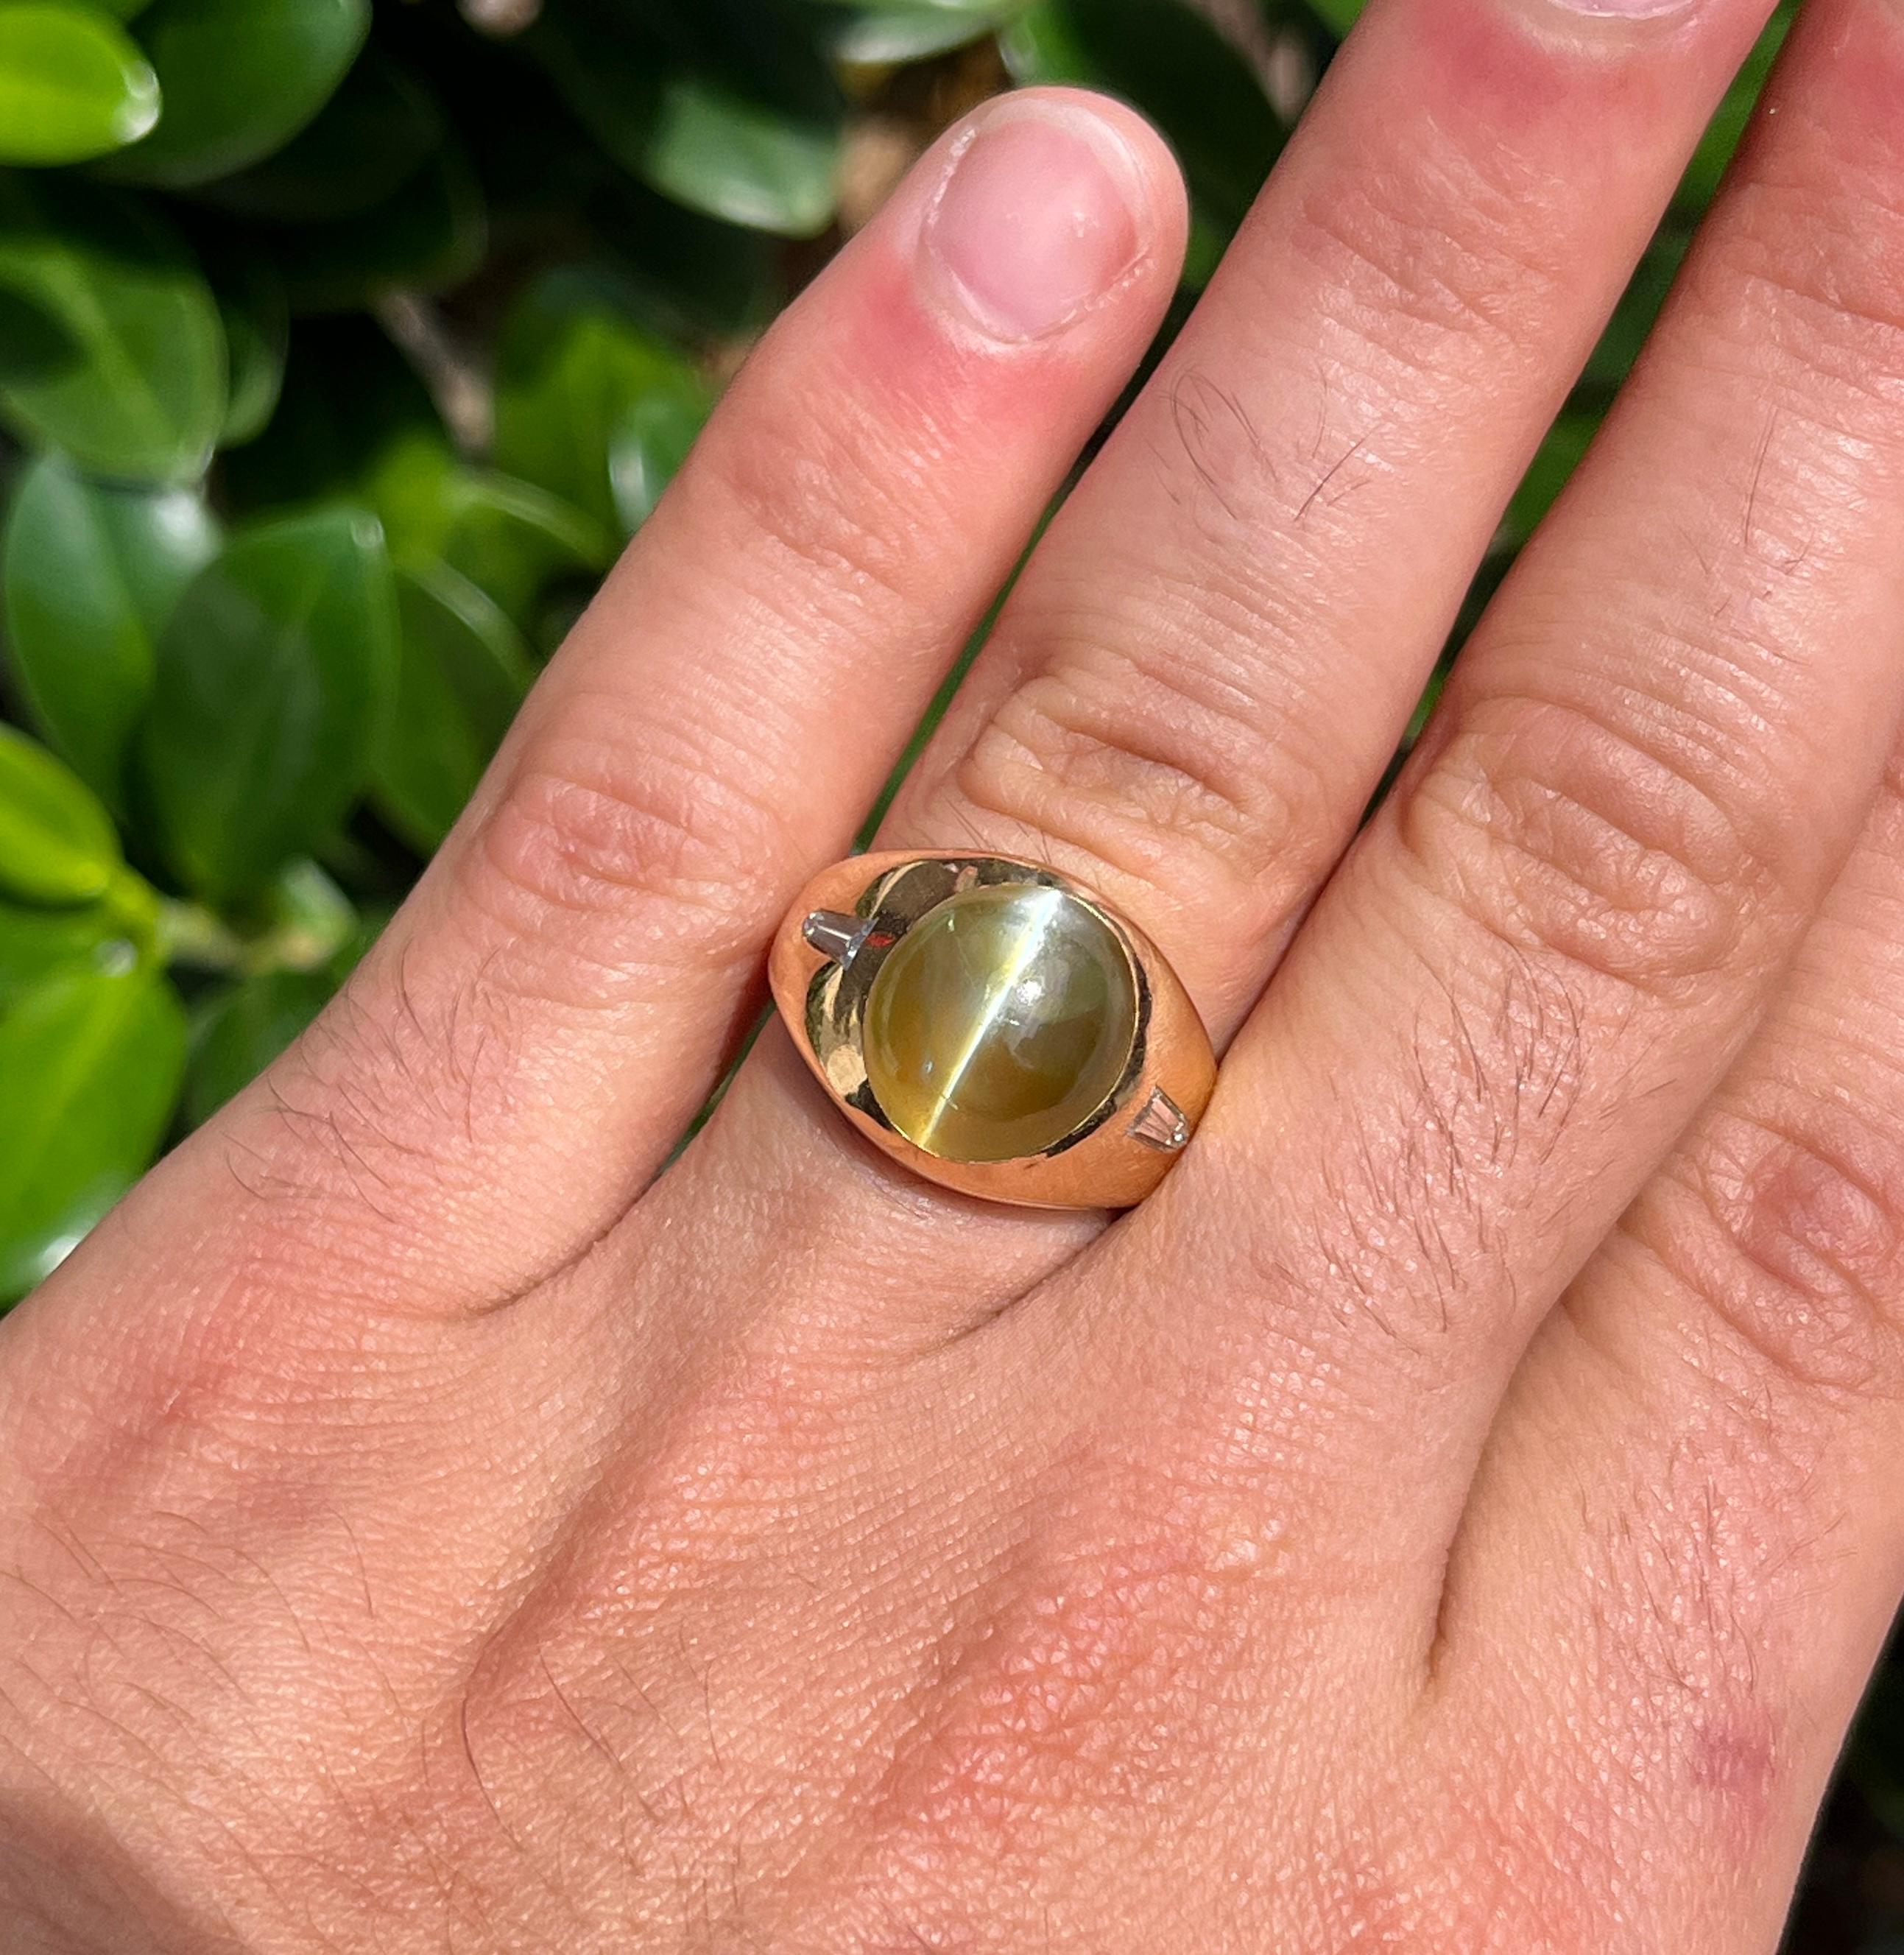 18 karat solid yellow gold men's ring mounts a 12 carat green Chrysoberyl Cat's Eye and tapered baguette diamond side stones. Hand made with a polished finish and secure bezel setting. The center stone bears a remarkable chatoyancy, wit a perfectly